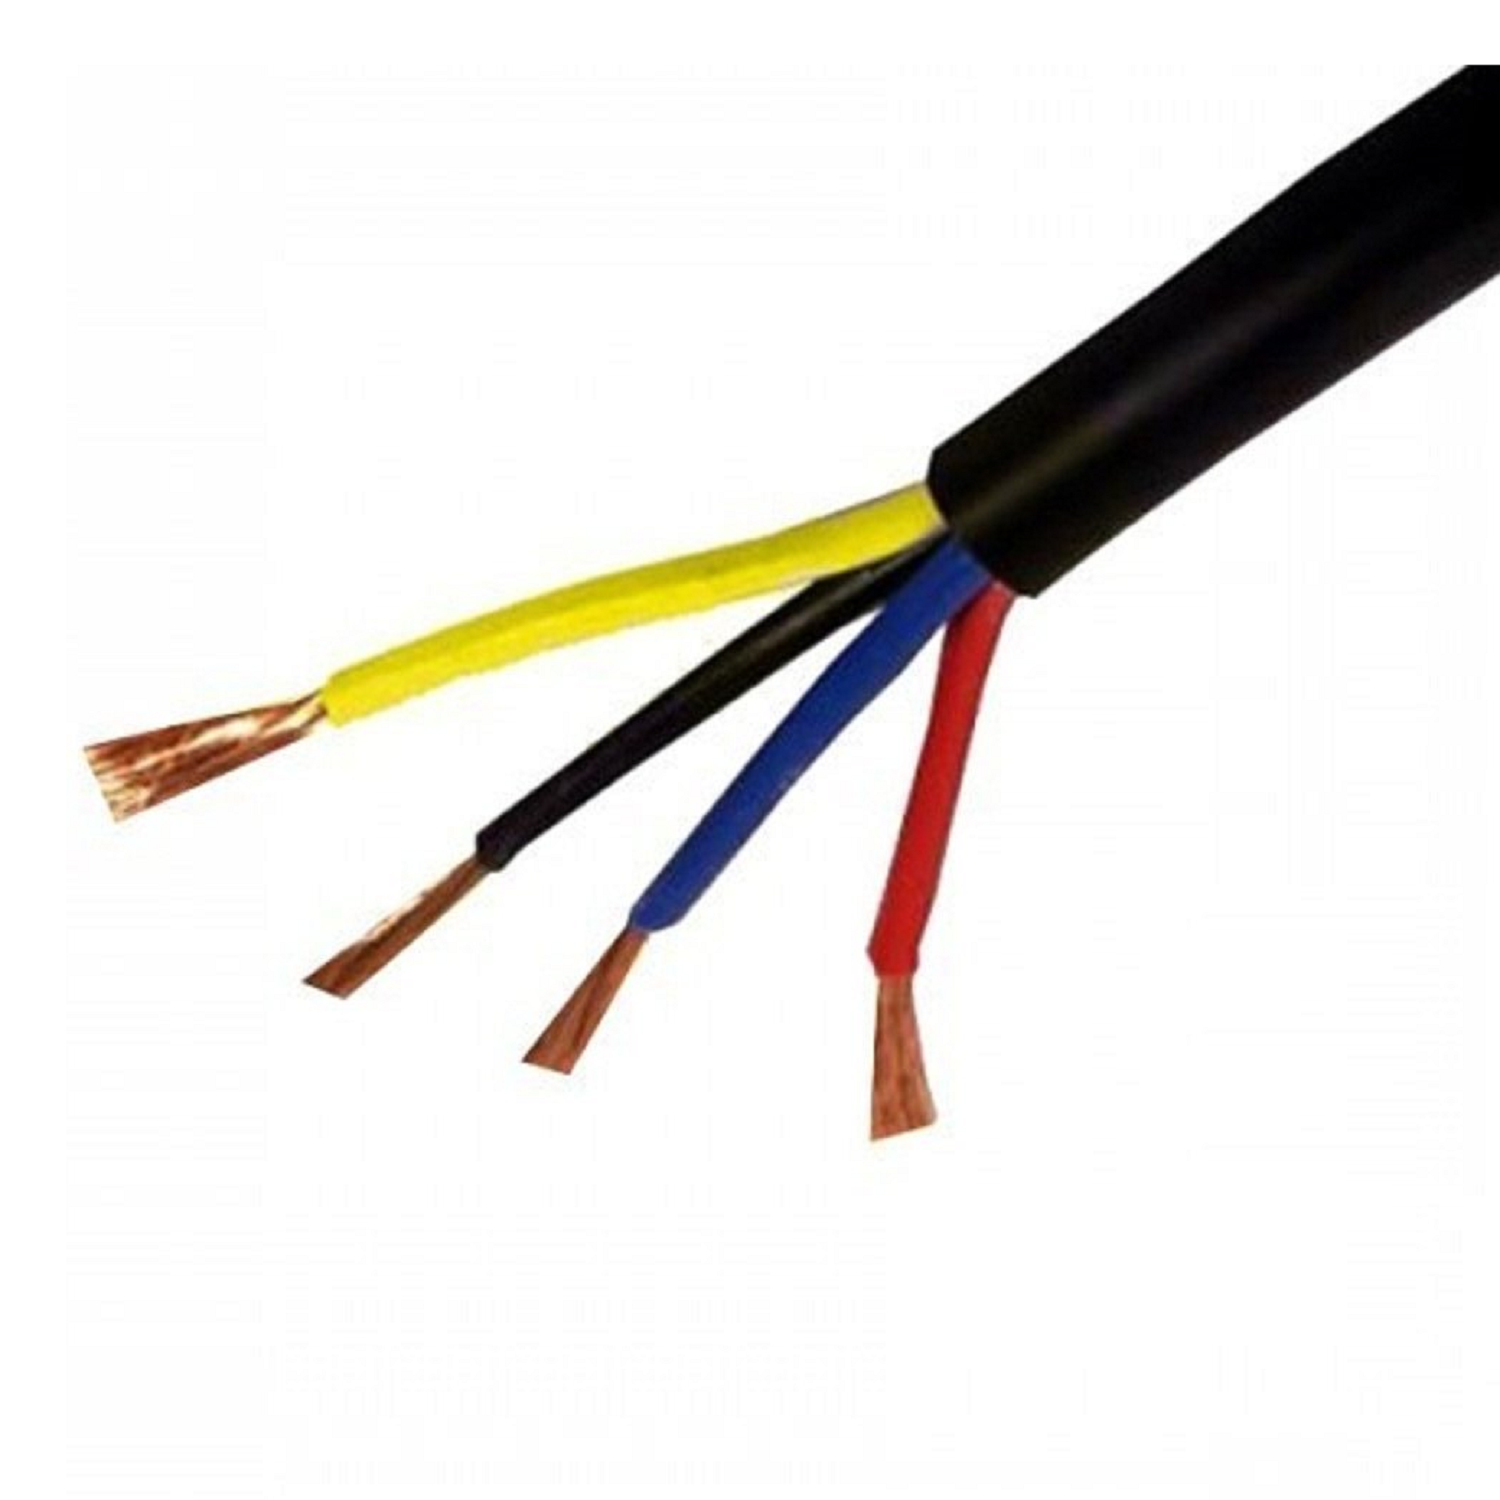 2.5 Sqmm Finolex Copper Flexible Cable With PVC Insulated For Domestic 38 Industrial Uses